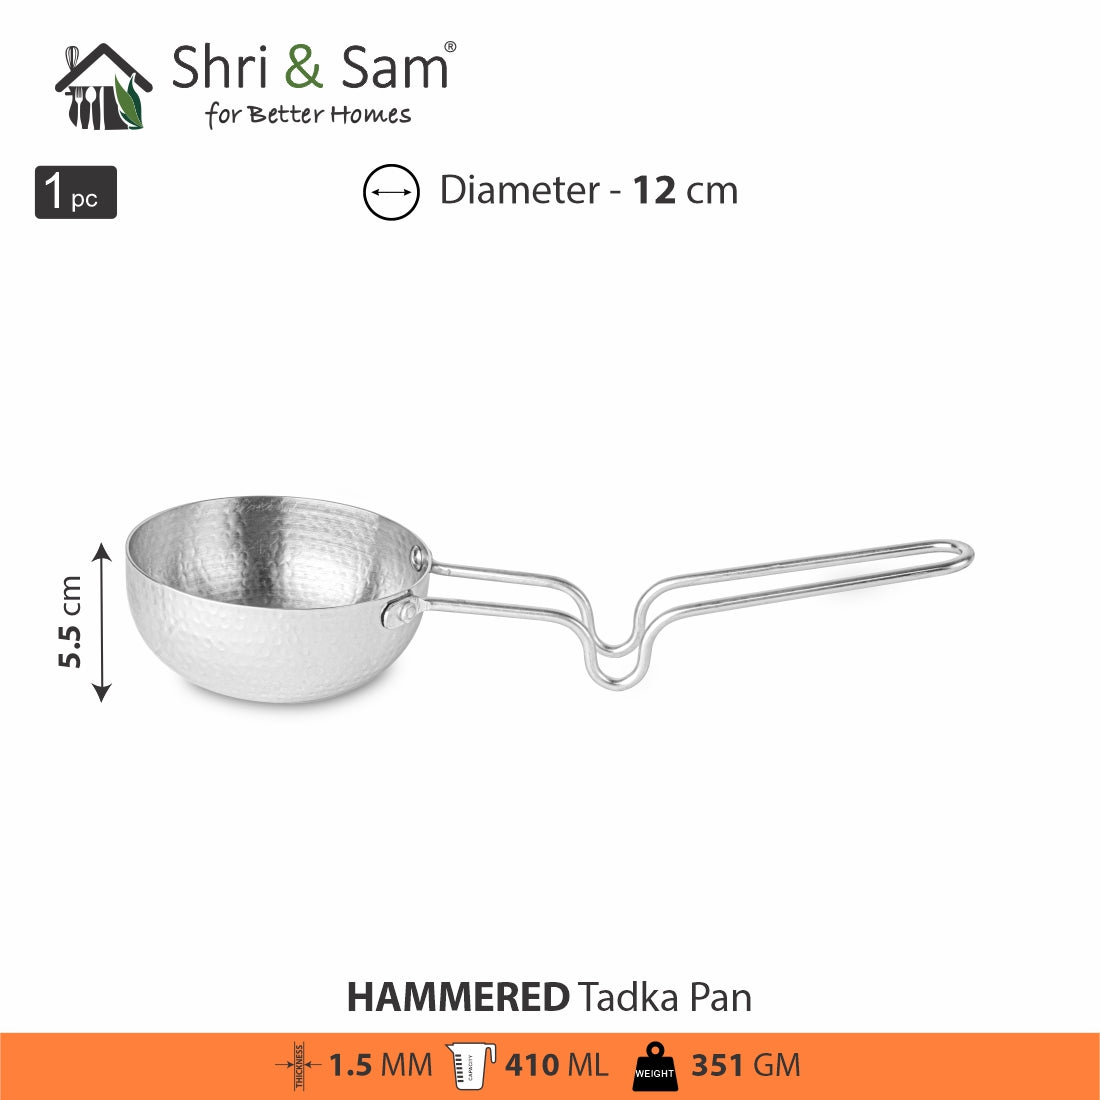 Stainless Steel Heavy Weight Hammered Tadka Pan